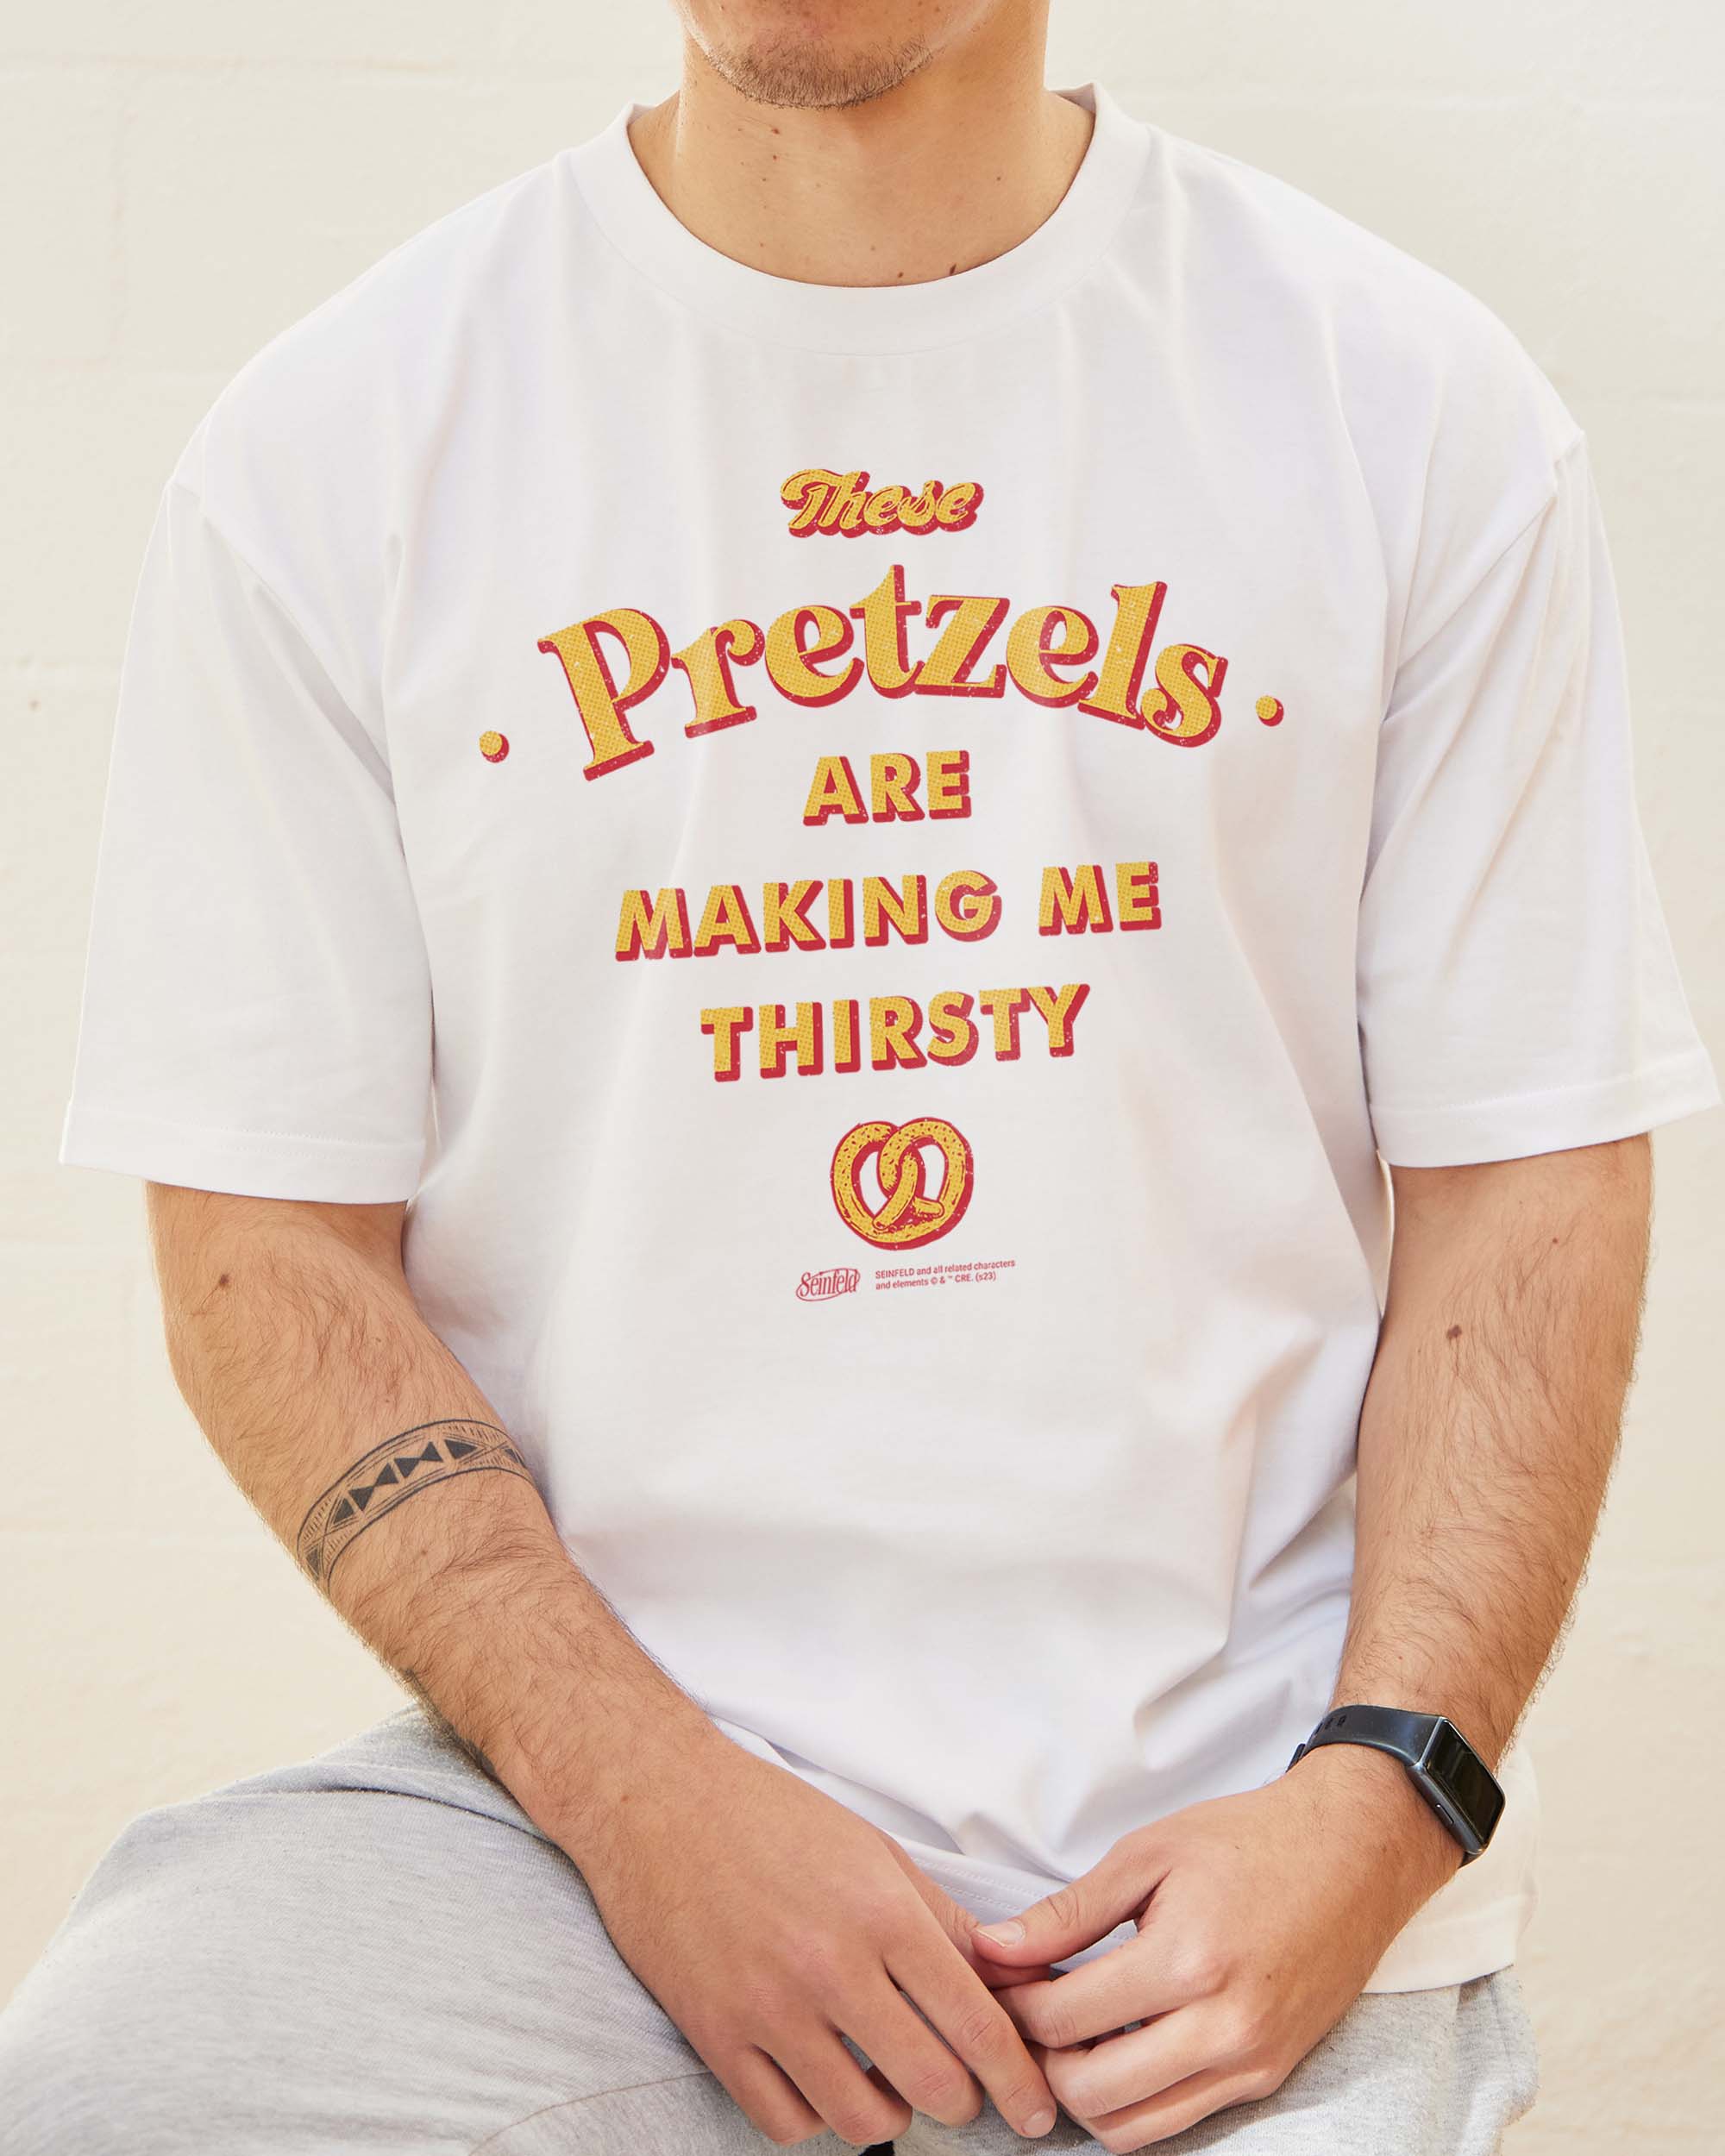 These Pretzels Are Making Me Thirsty T-Shirt Europe Online White